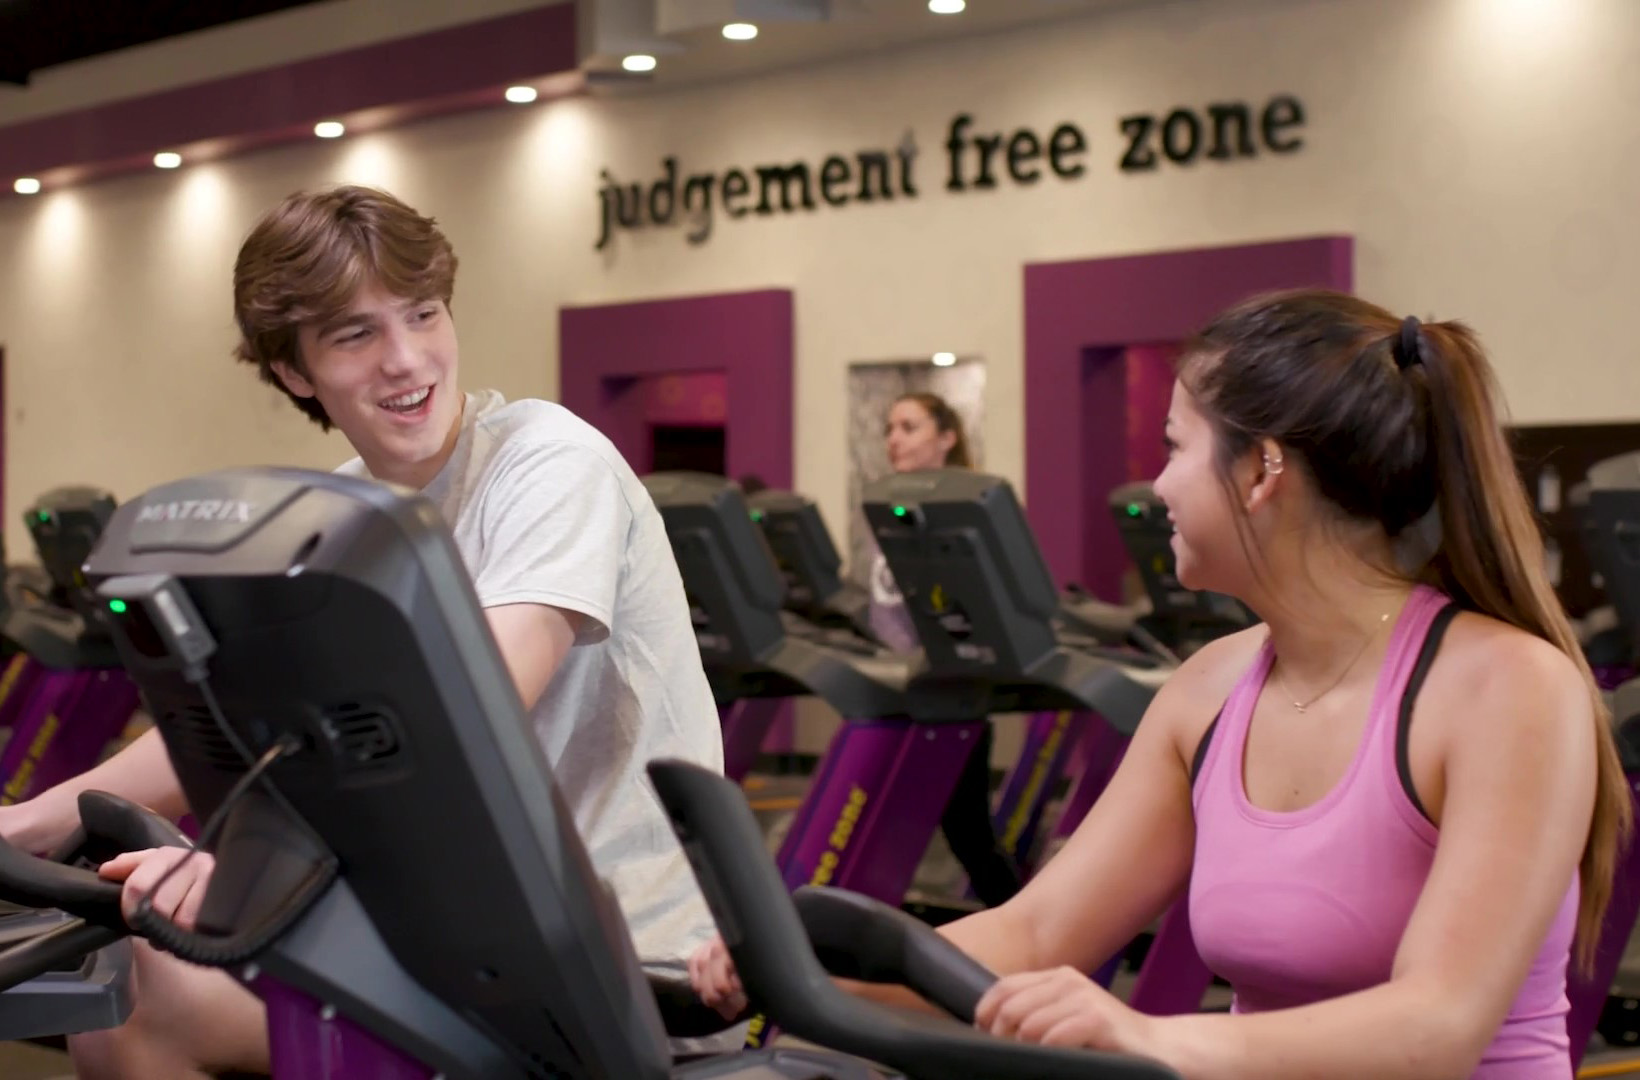 Planet Fitness - home of the Judgement Free Zone(r) - is inviting high schoolers ages 14 - 19* to work out for free at any of its more than 2,200 Planet Fitness locations throughout the United States and Canada from May 16 through August 31 as part of the High School Summer Pass initiative.